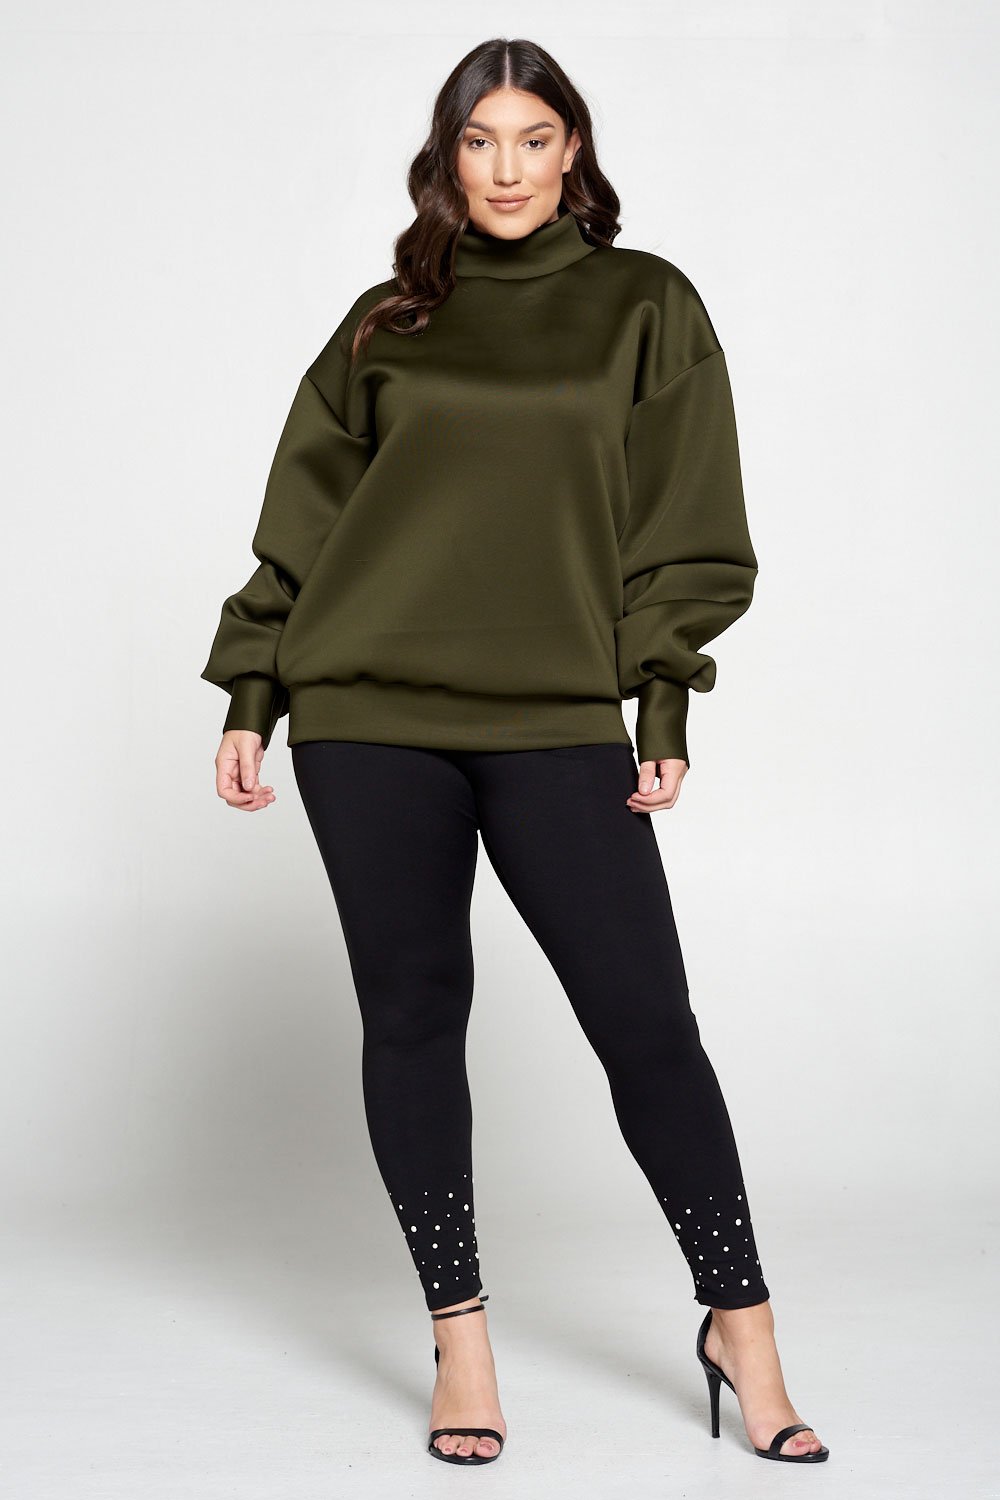 livd L I V D women's contemporary plus size boutique neoprene sweater sweatshirt with exaggerated sleeves in olive green